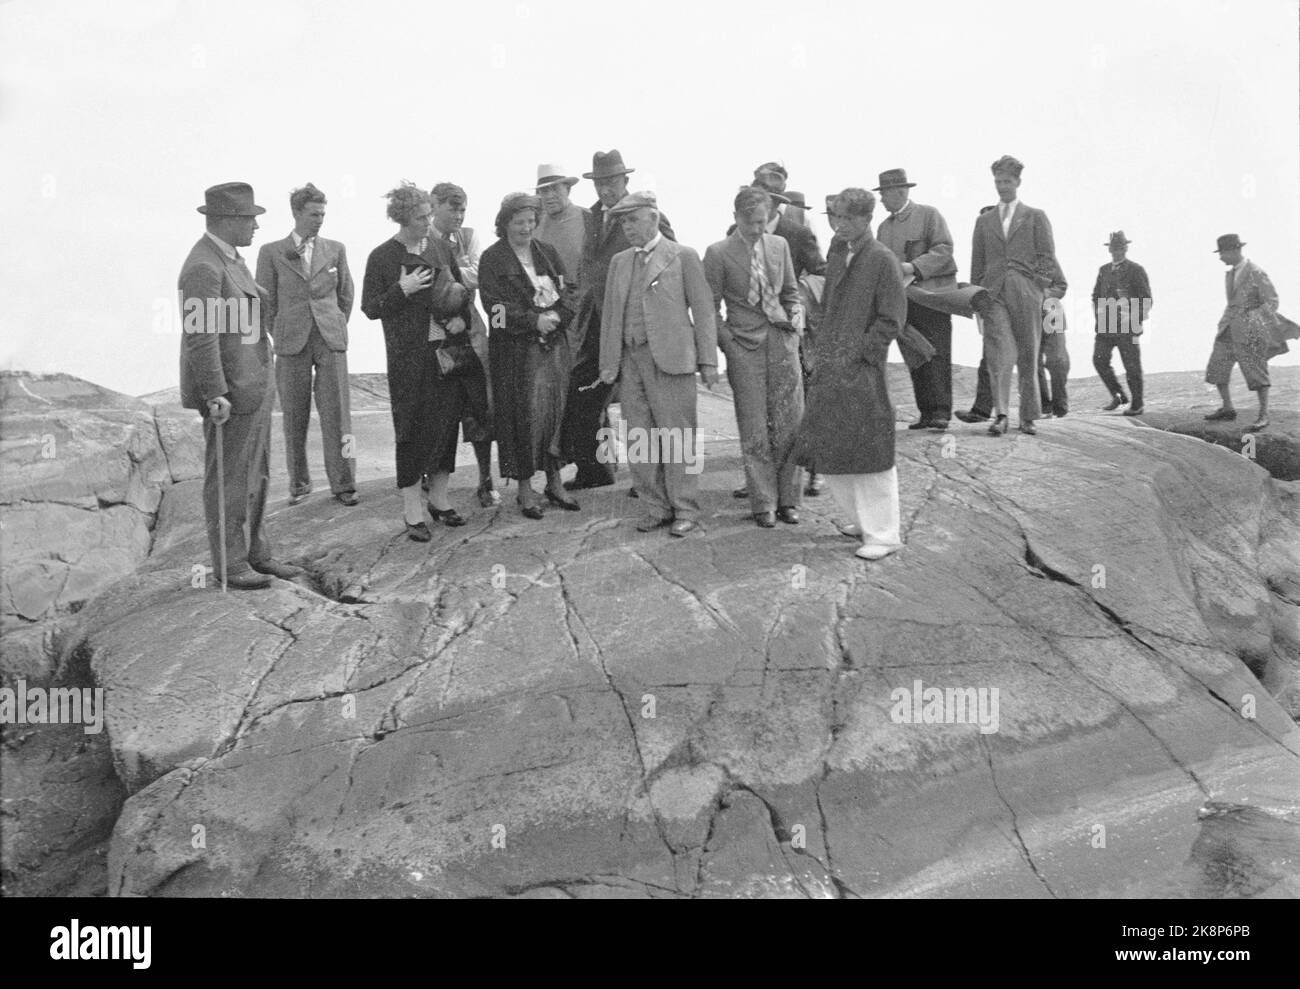 1936. The Cow case. The scene inspection at the site where Dahl drowned. Ingeborg Köber present during the inspection. On August 8, 1934, Fredrikstad's city bailiff, Ludvig Dahl was killed during swimming at the Rørvasstangen on Hankø. His daughter, Mrs. Ingeborg Køber, was the only witness to the accident. The accident was predicted during spiritist sessions with her daughter as a medium. Dahl also had an accident insurance that was paid his widow. Ingeborg Köber was imprisoned for about half a year, suspected of having contributed to his father's death, but the case was closed. Photo: NTB Stock Photo